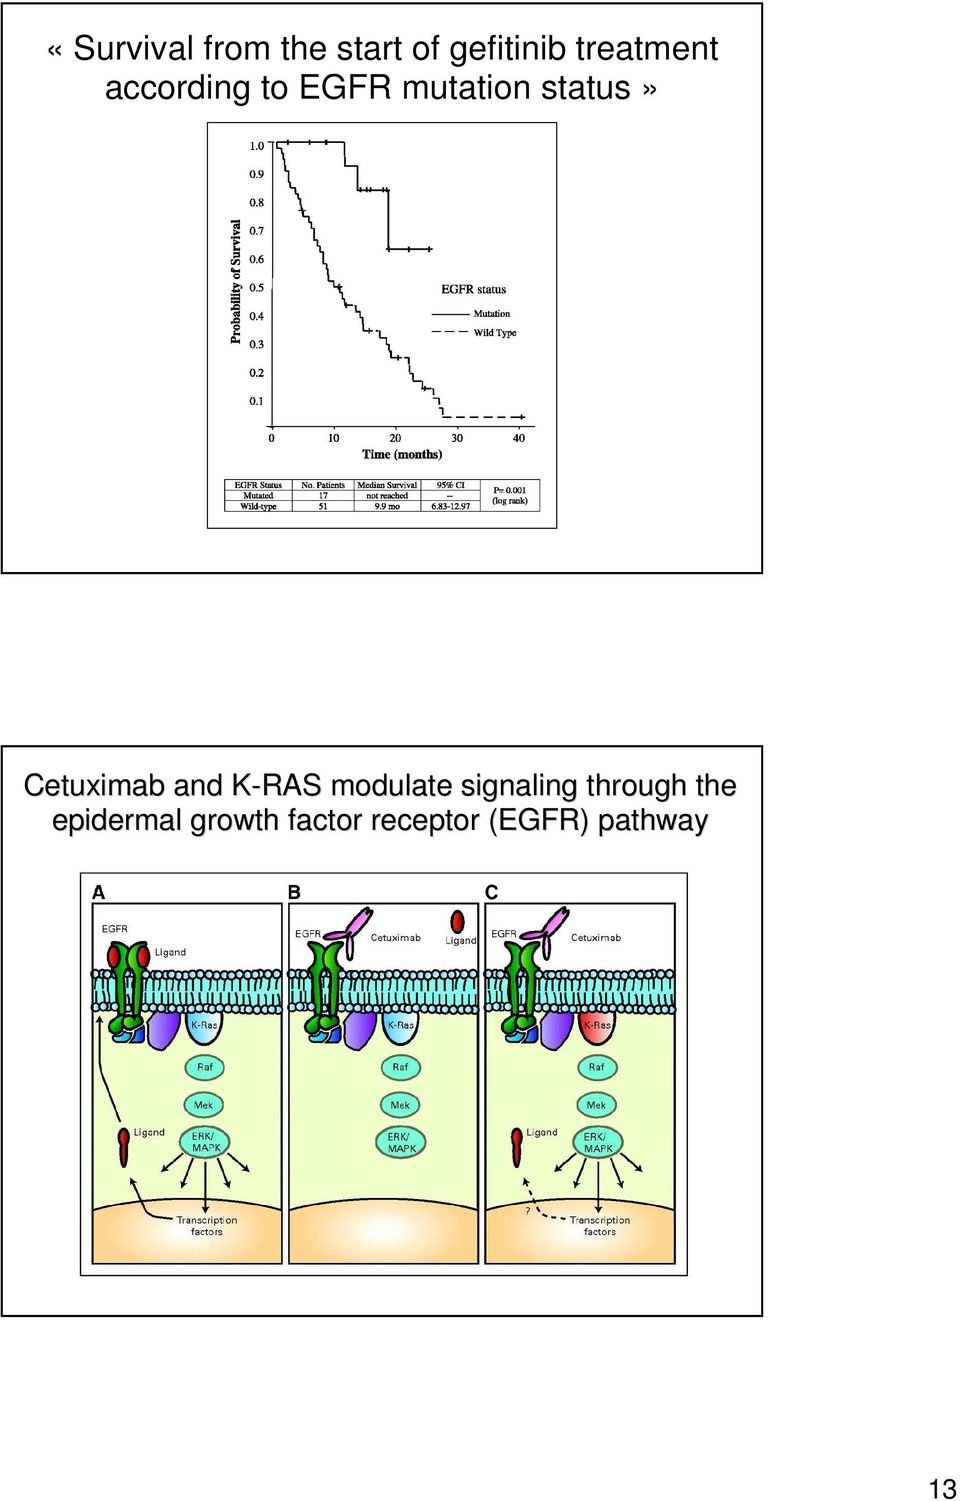 Cetuximab and K-RAS K modulate signaling